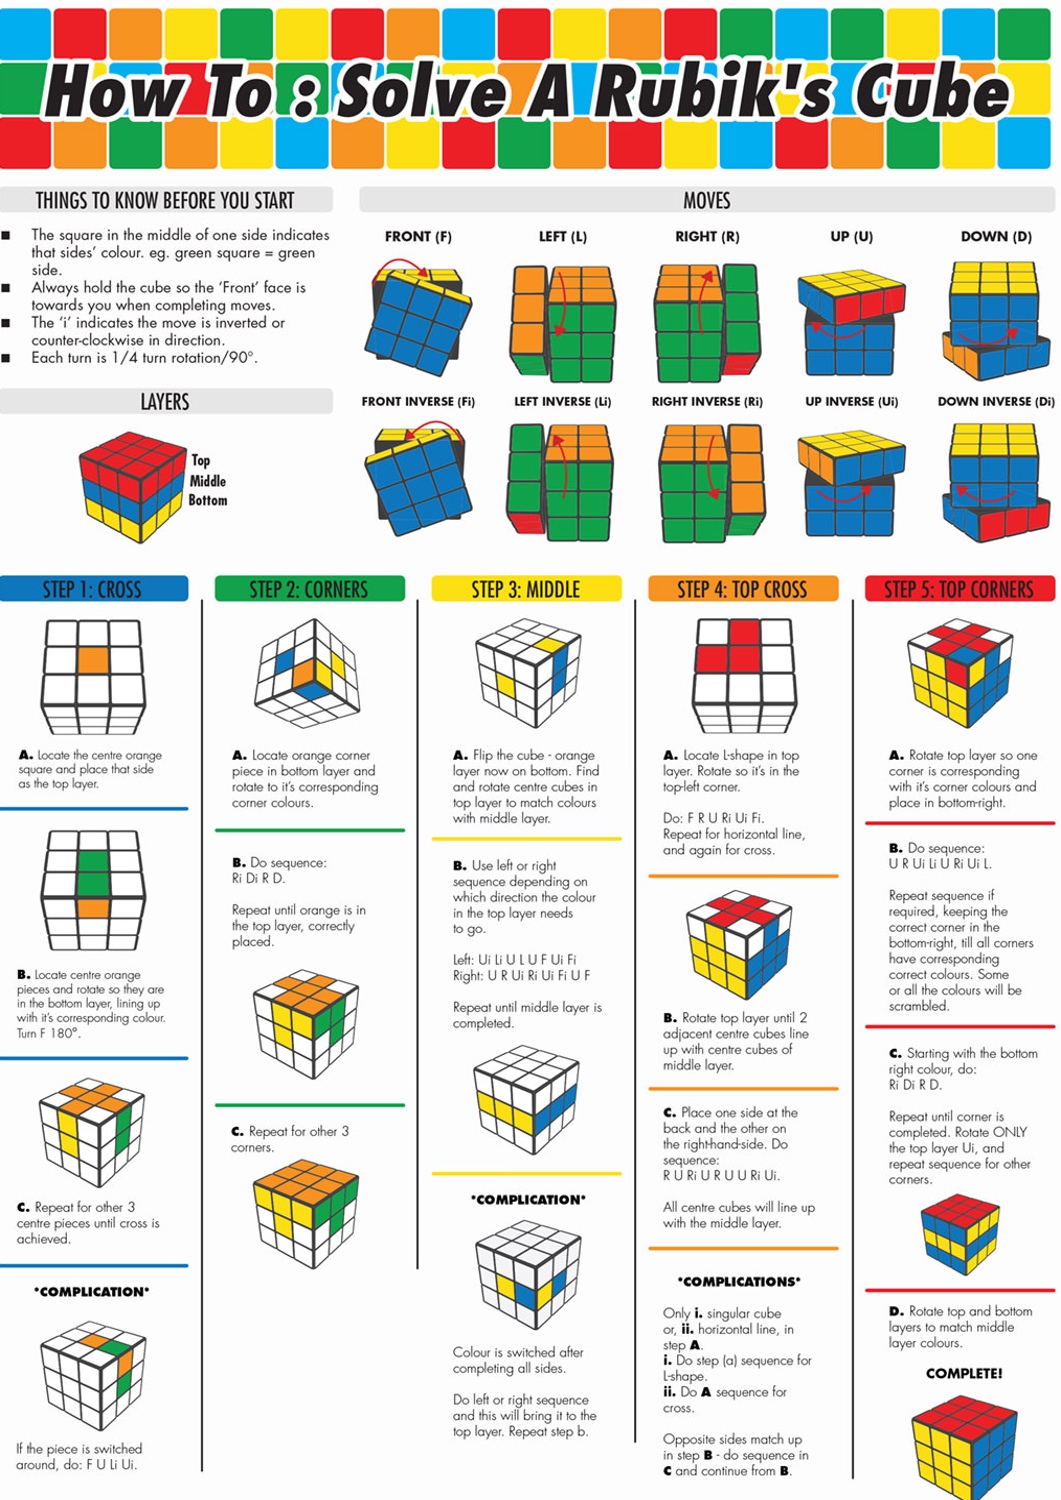 How To Solve A Rubik’s Cube: The Definitive Guide